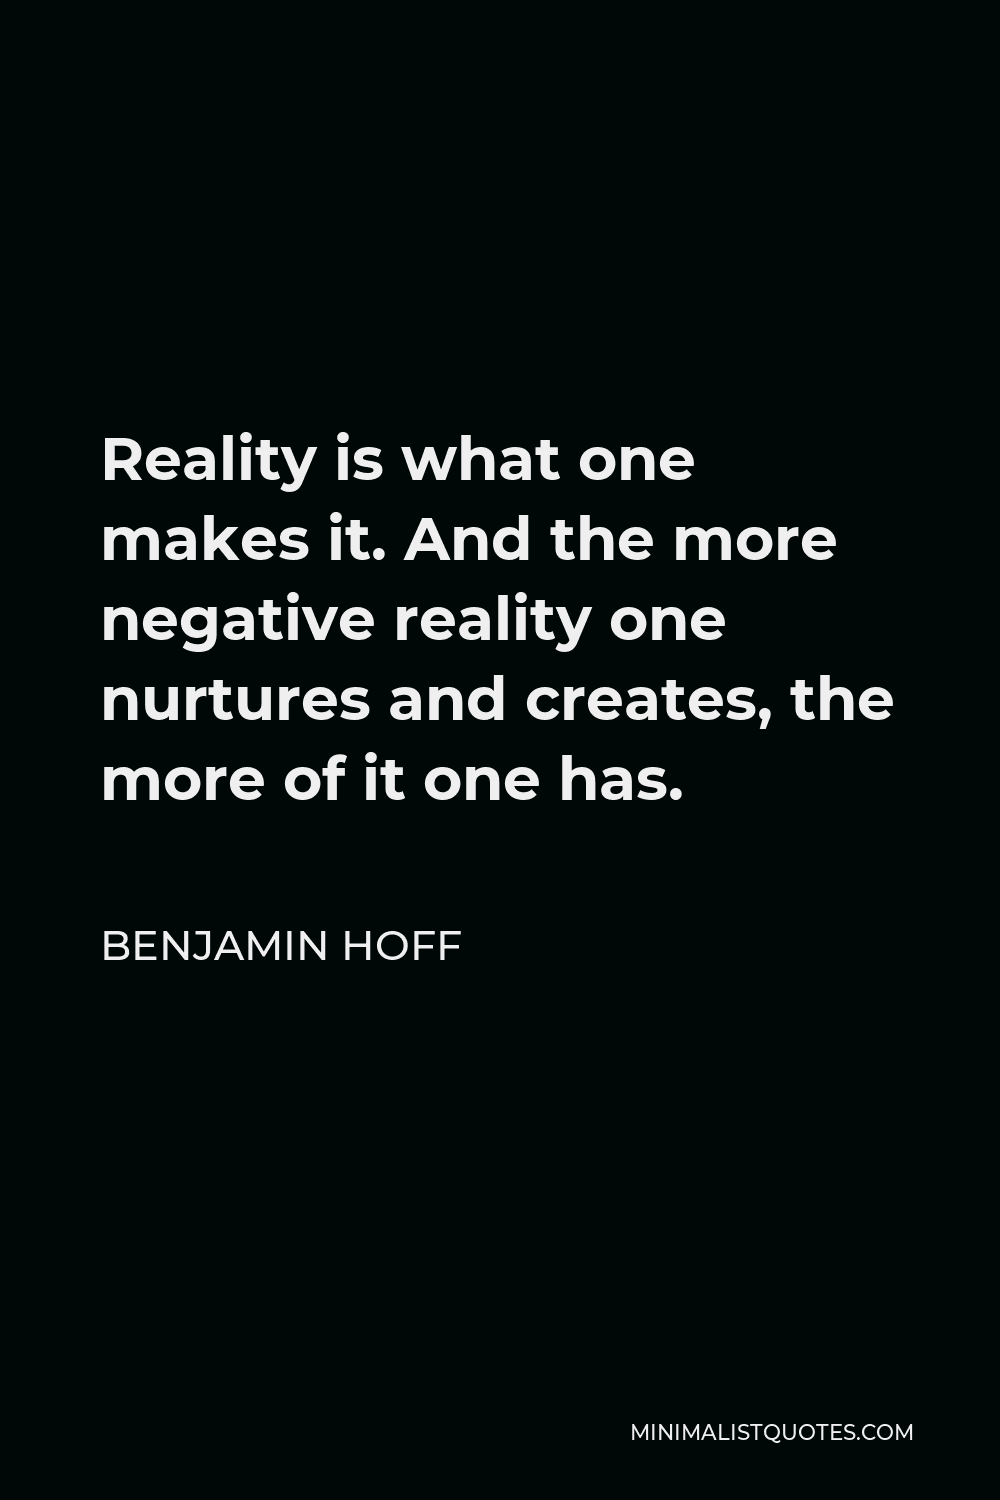 Benjamin Hoff Quote - Reality is what one makes it. And the more negative reality one nurtures and creates, the more of it one has.